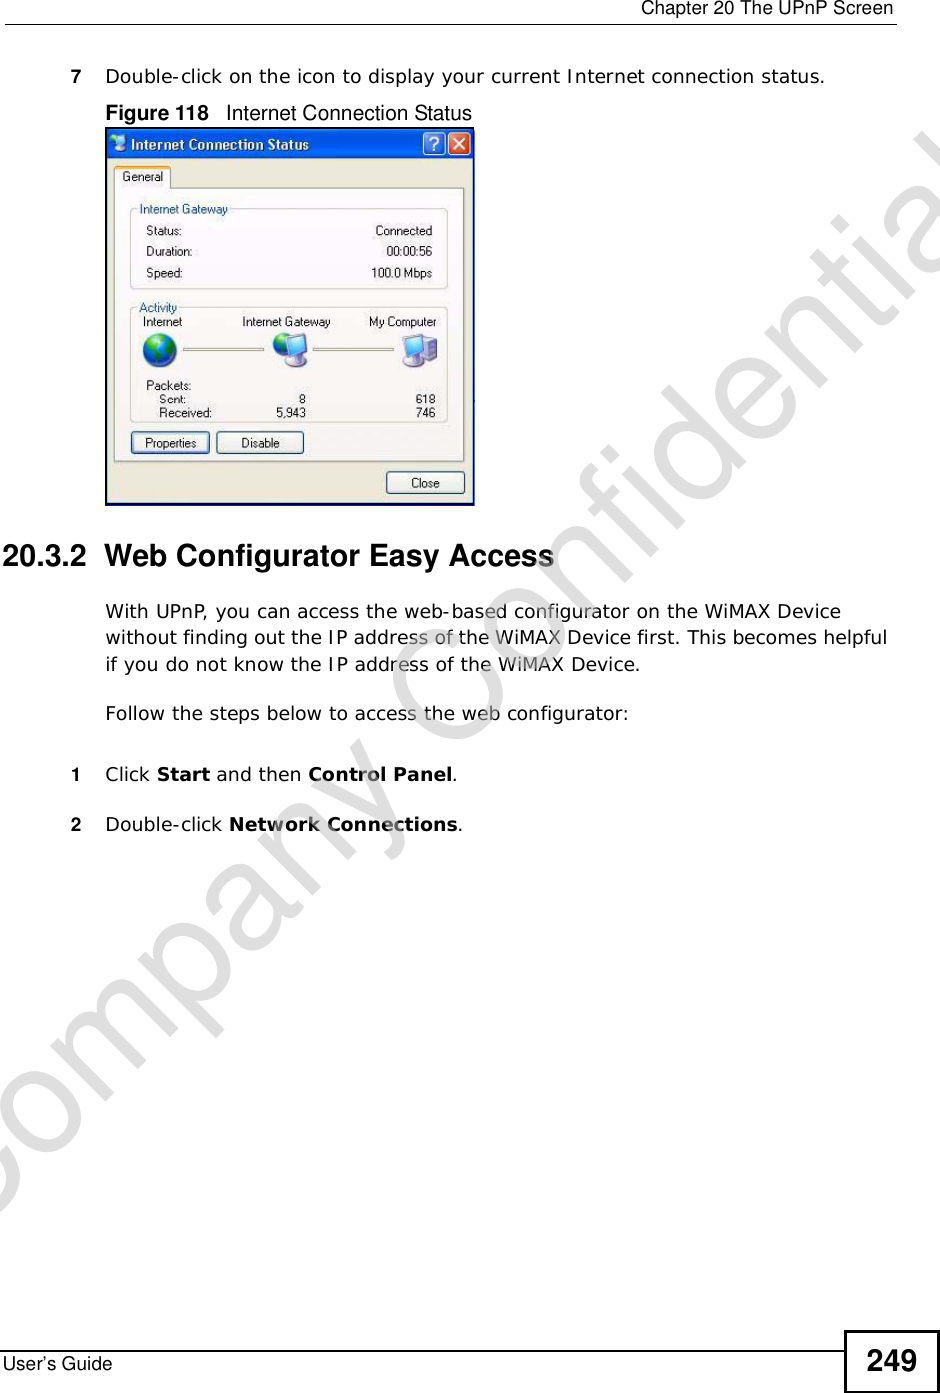  Chapter 20The UPnP ScreenUser’s Guide 2497Double-click on the icon to display your current Internet connection status.Figure 118   Internet Connection Status20.3.2  Web Configurator Easy AccessWith UPnP, you can access the web-based configurator on the WiMAX Device without finding out the IP address of the WiMAX Device first. This becomes helpful if you do not know the IP address of the WiMAX Device.Follow the steps below to access the web configurator:1Click Start and then Control Panel.2Double-click Network Connections.Company Confidential